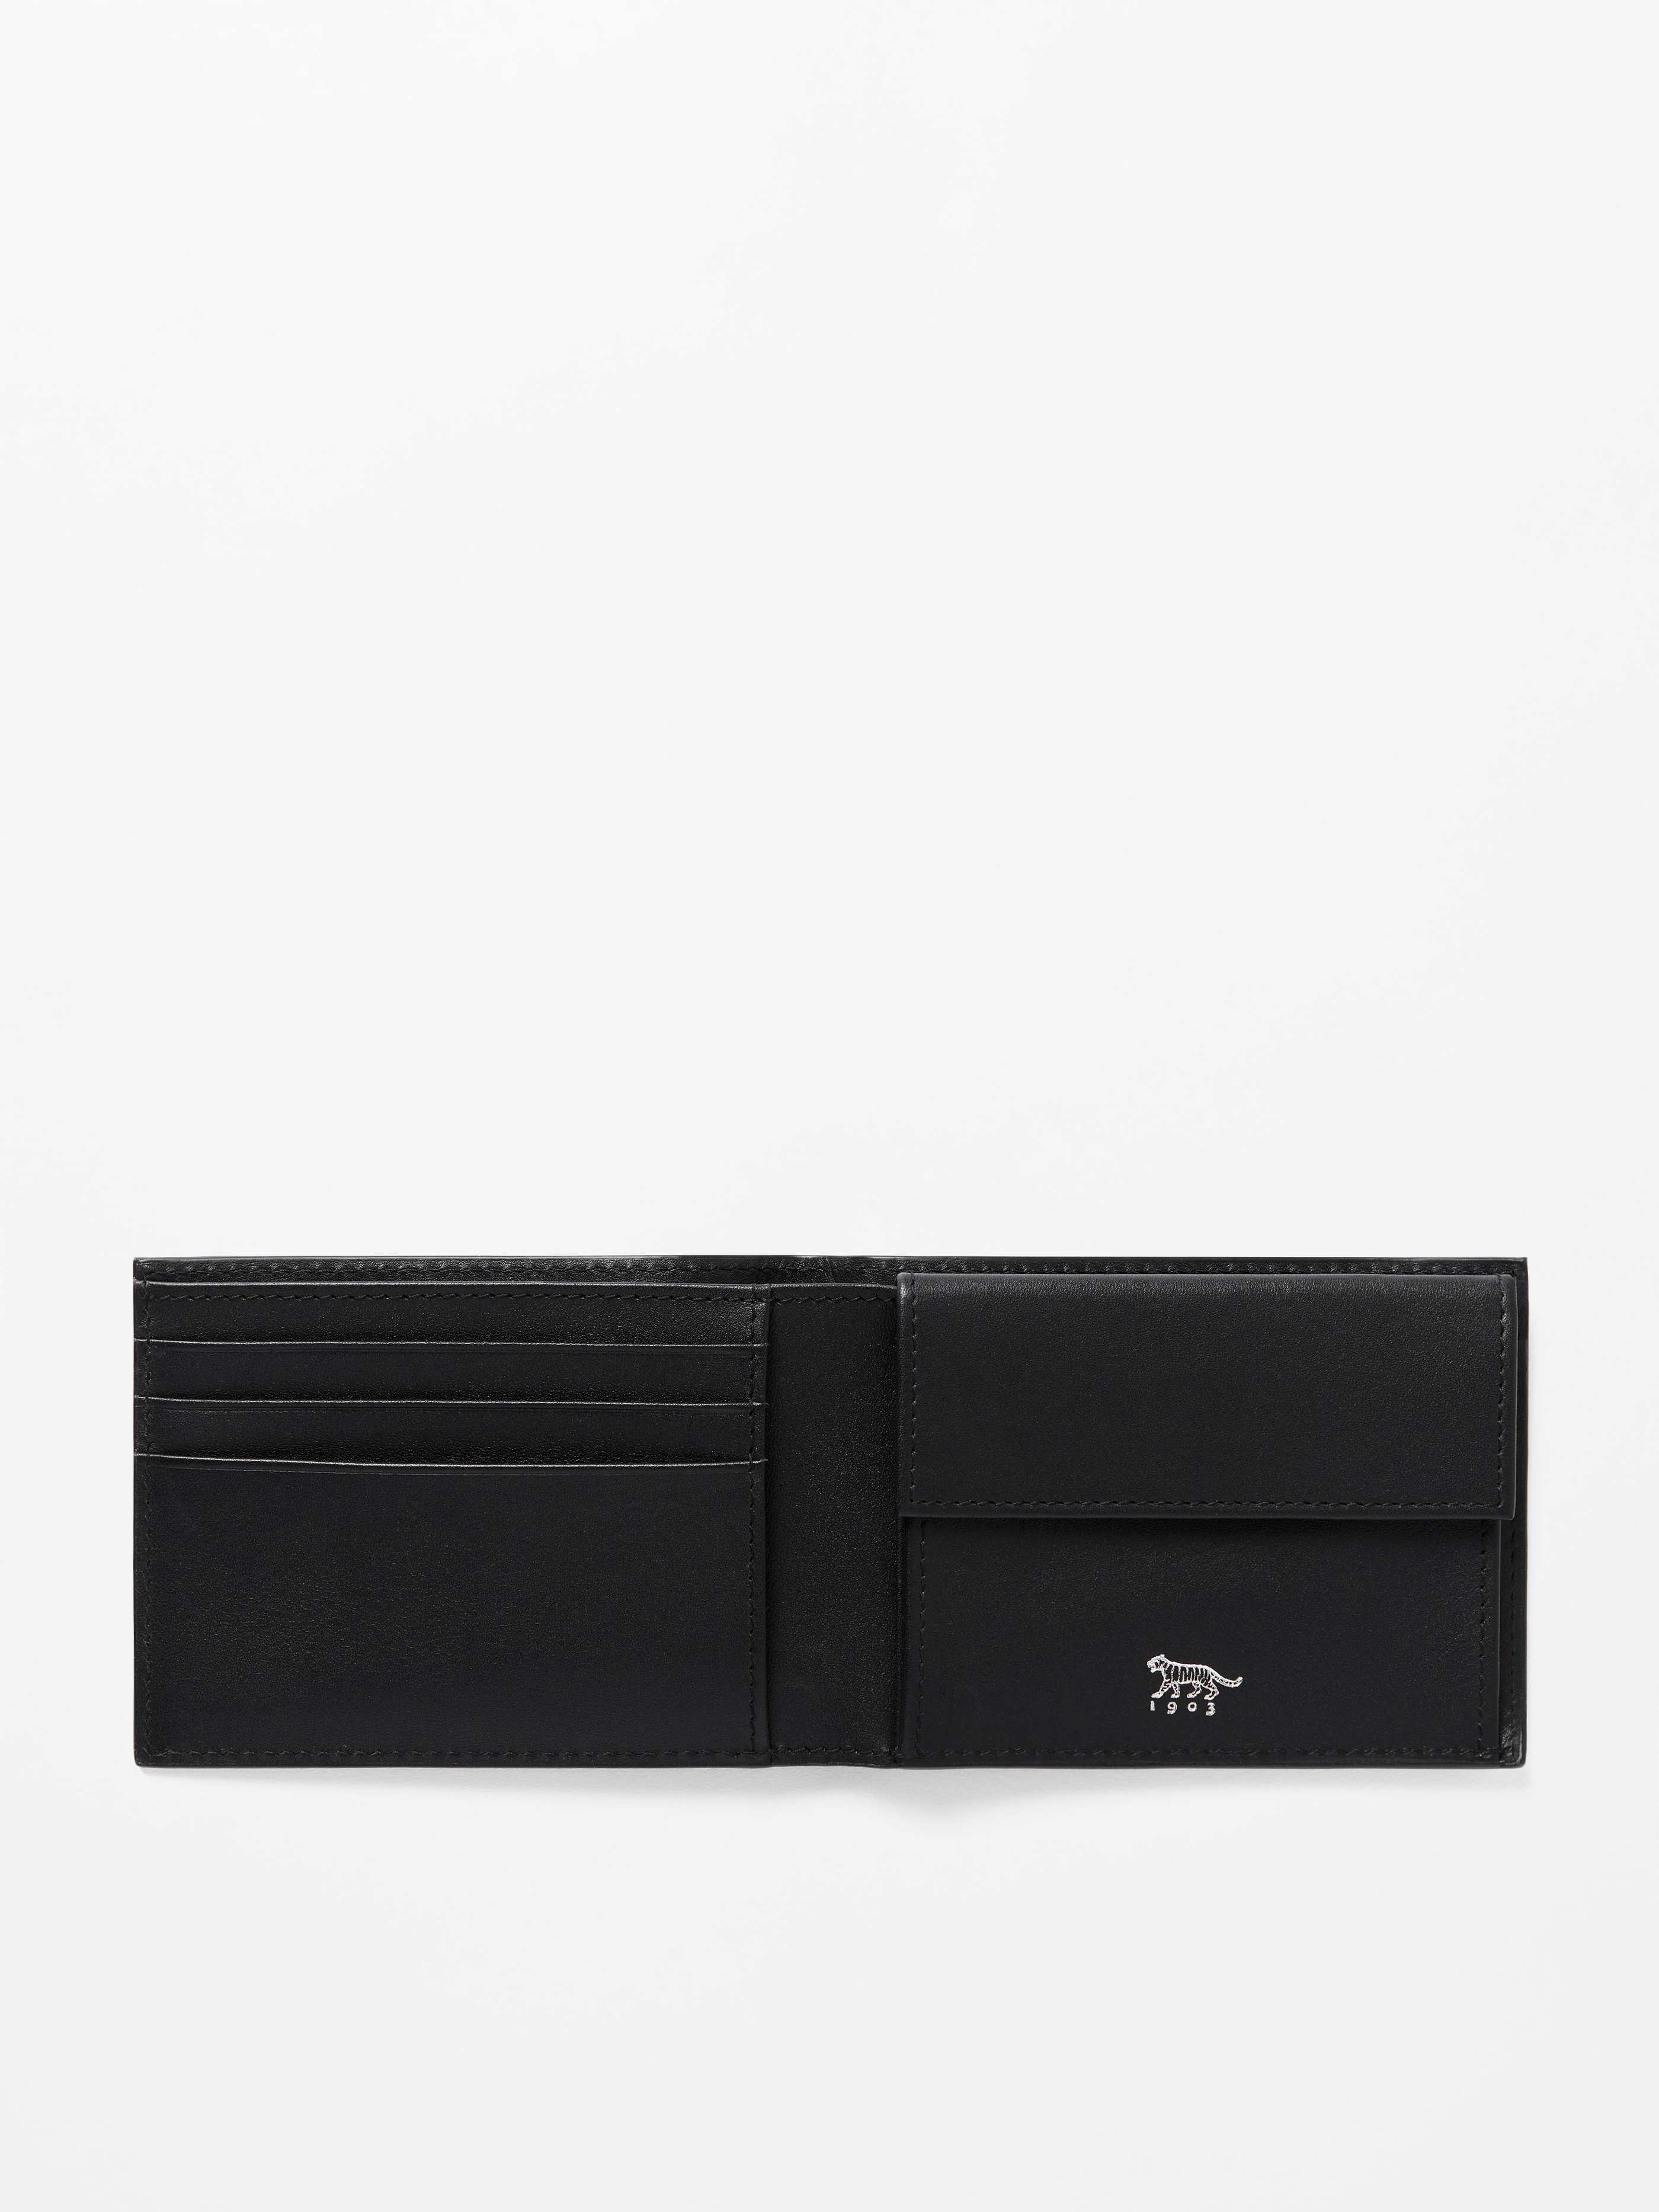 Tiger of Sweden Wivalius P Wallet T70332100 Black Saffiano Leather | Shop from eightywingold an official brand partner for Tiger of Sweden Canada and US